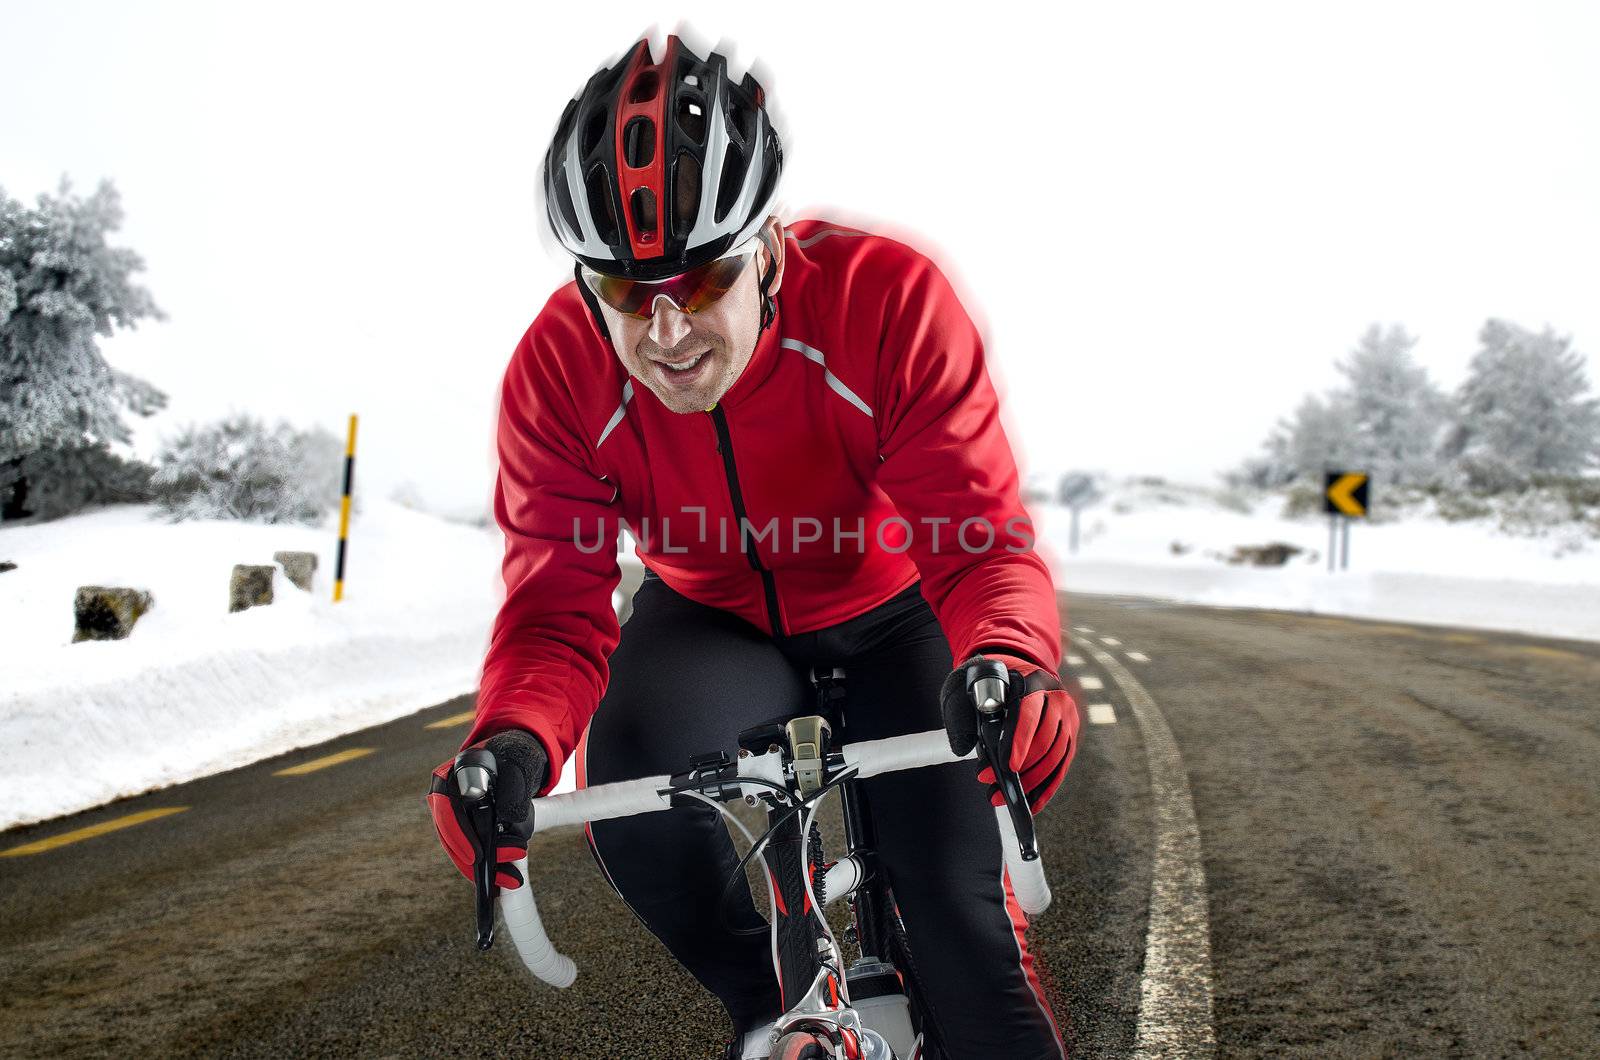 Cyclist on road bike through a asphalt road in the mountains with snow.